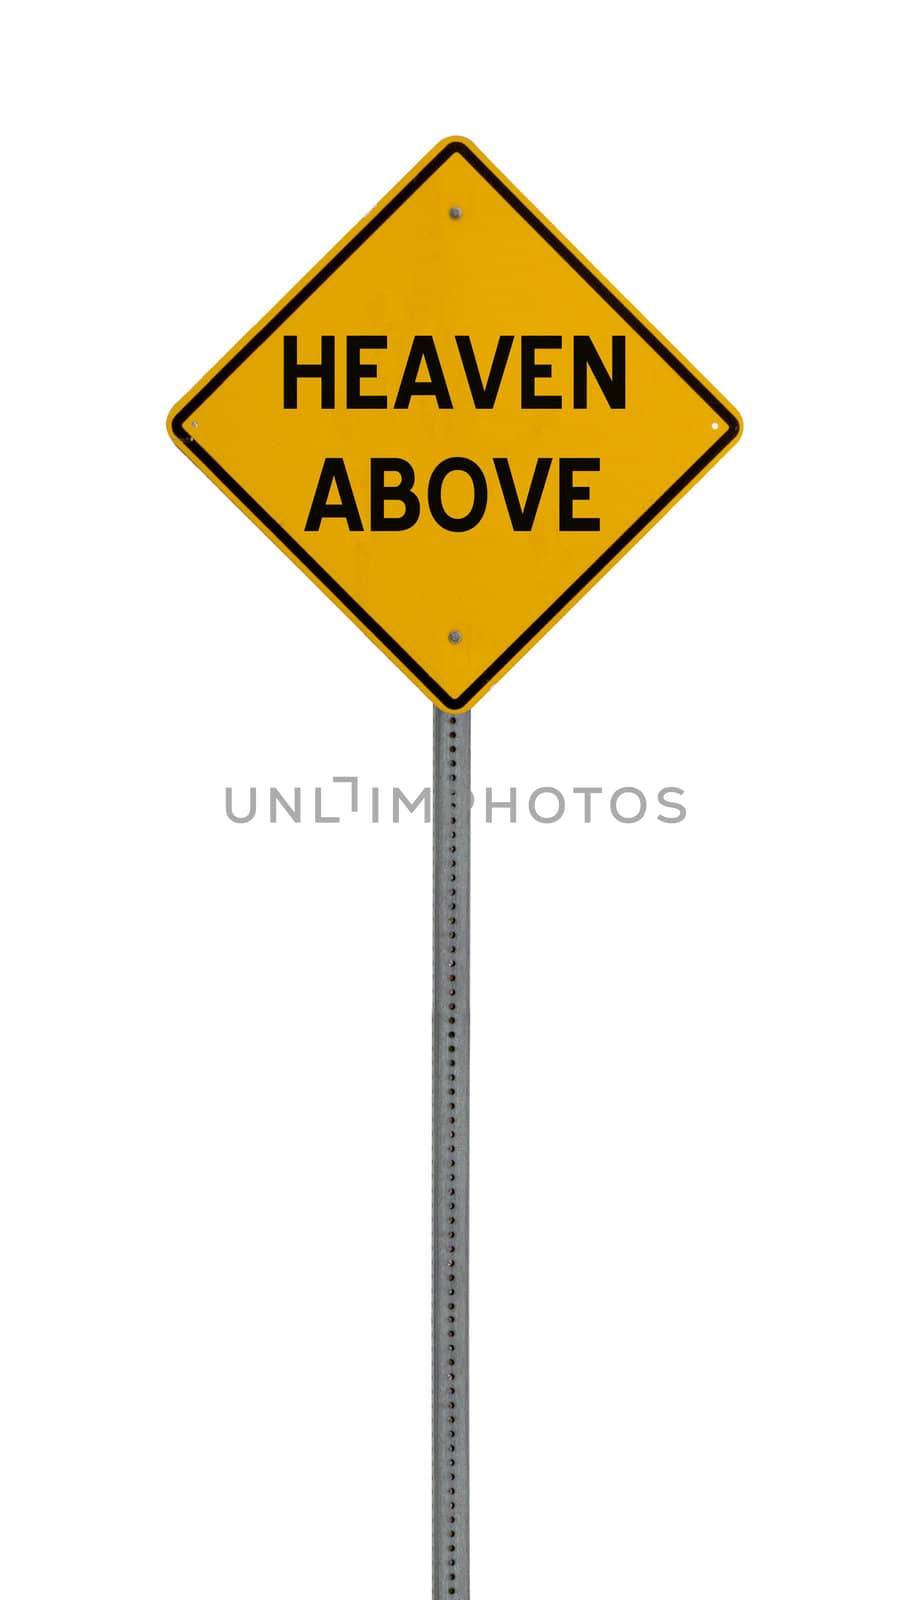  heaven above - Yellow road warning sign by jeremywhat